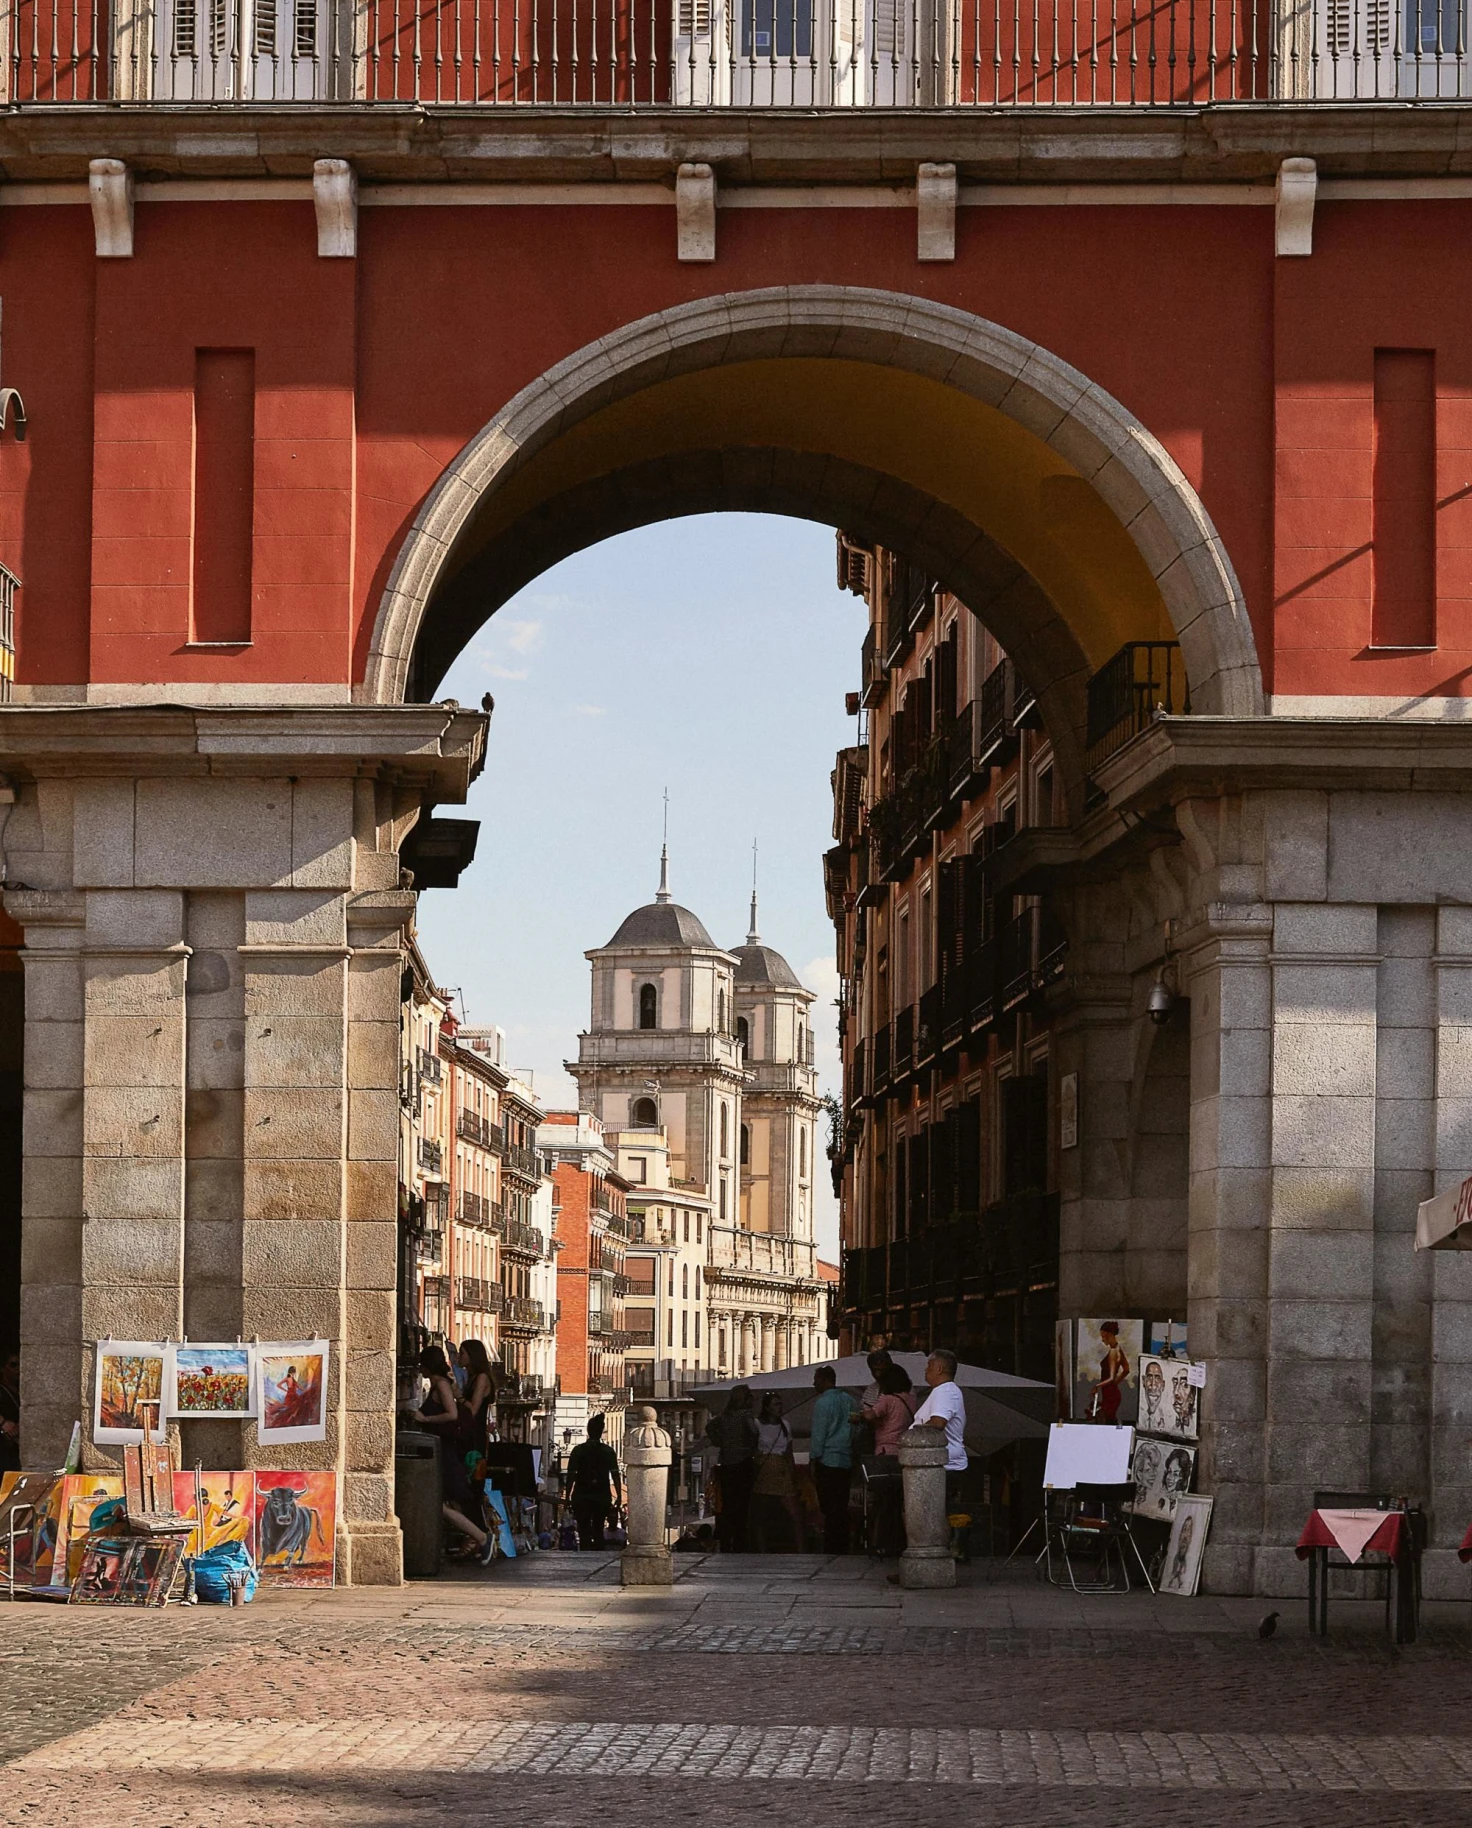 a large archway leads into a narrow city street with vendors and artists